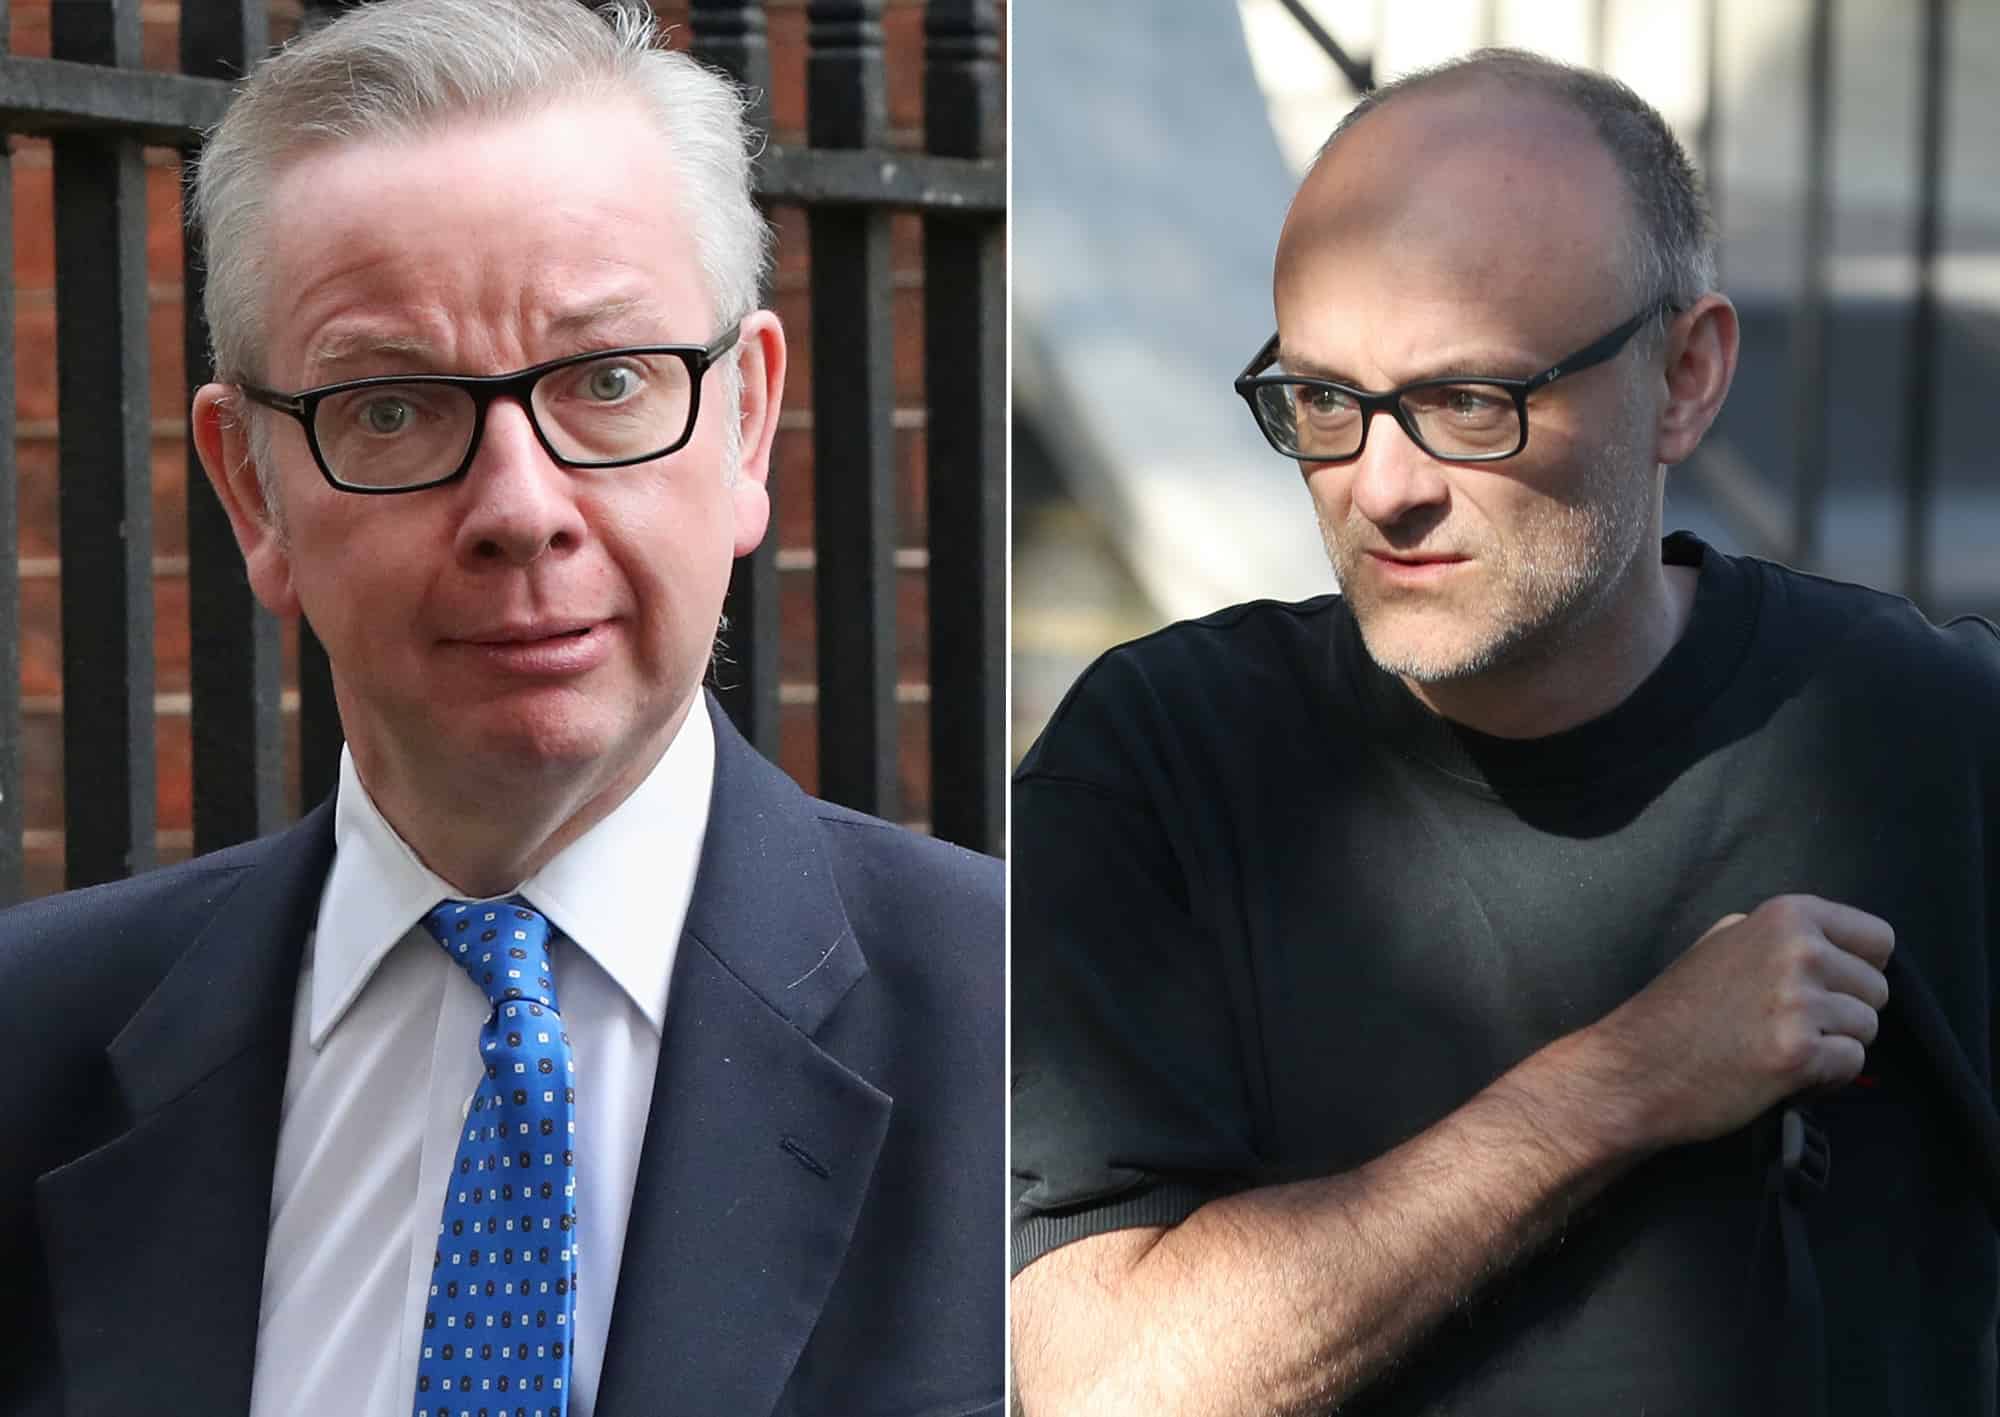 Michael Gove says PM values Dom for his “bluntness” and “blistering honesty”